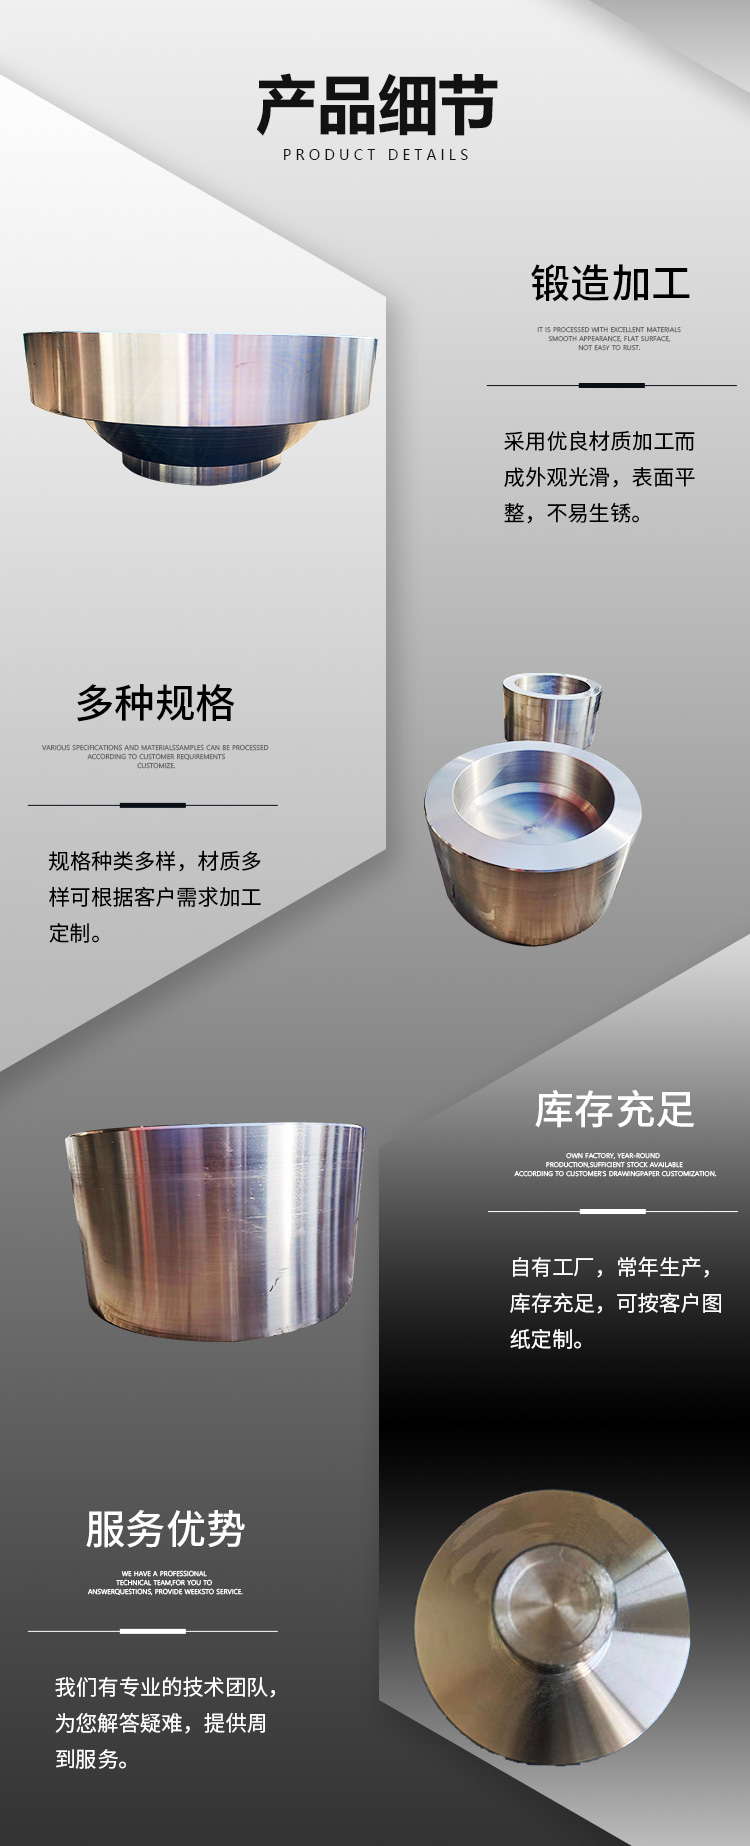 Precision machining of ring forgings, flange production, non-standard round bar and ring machining